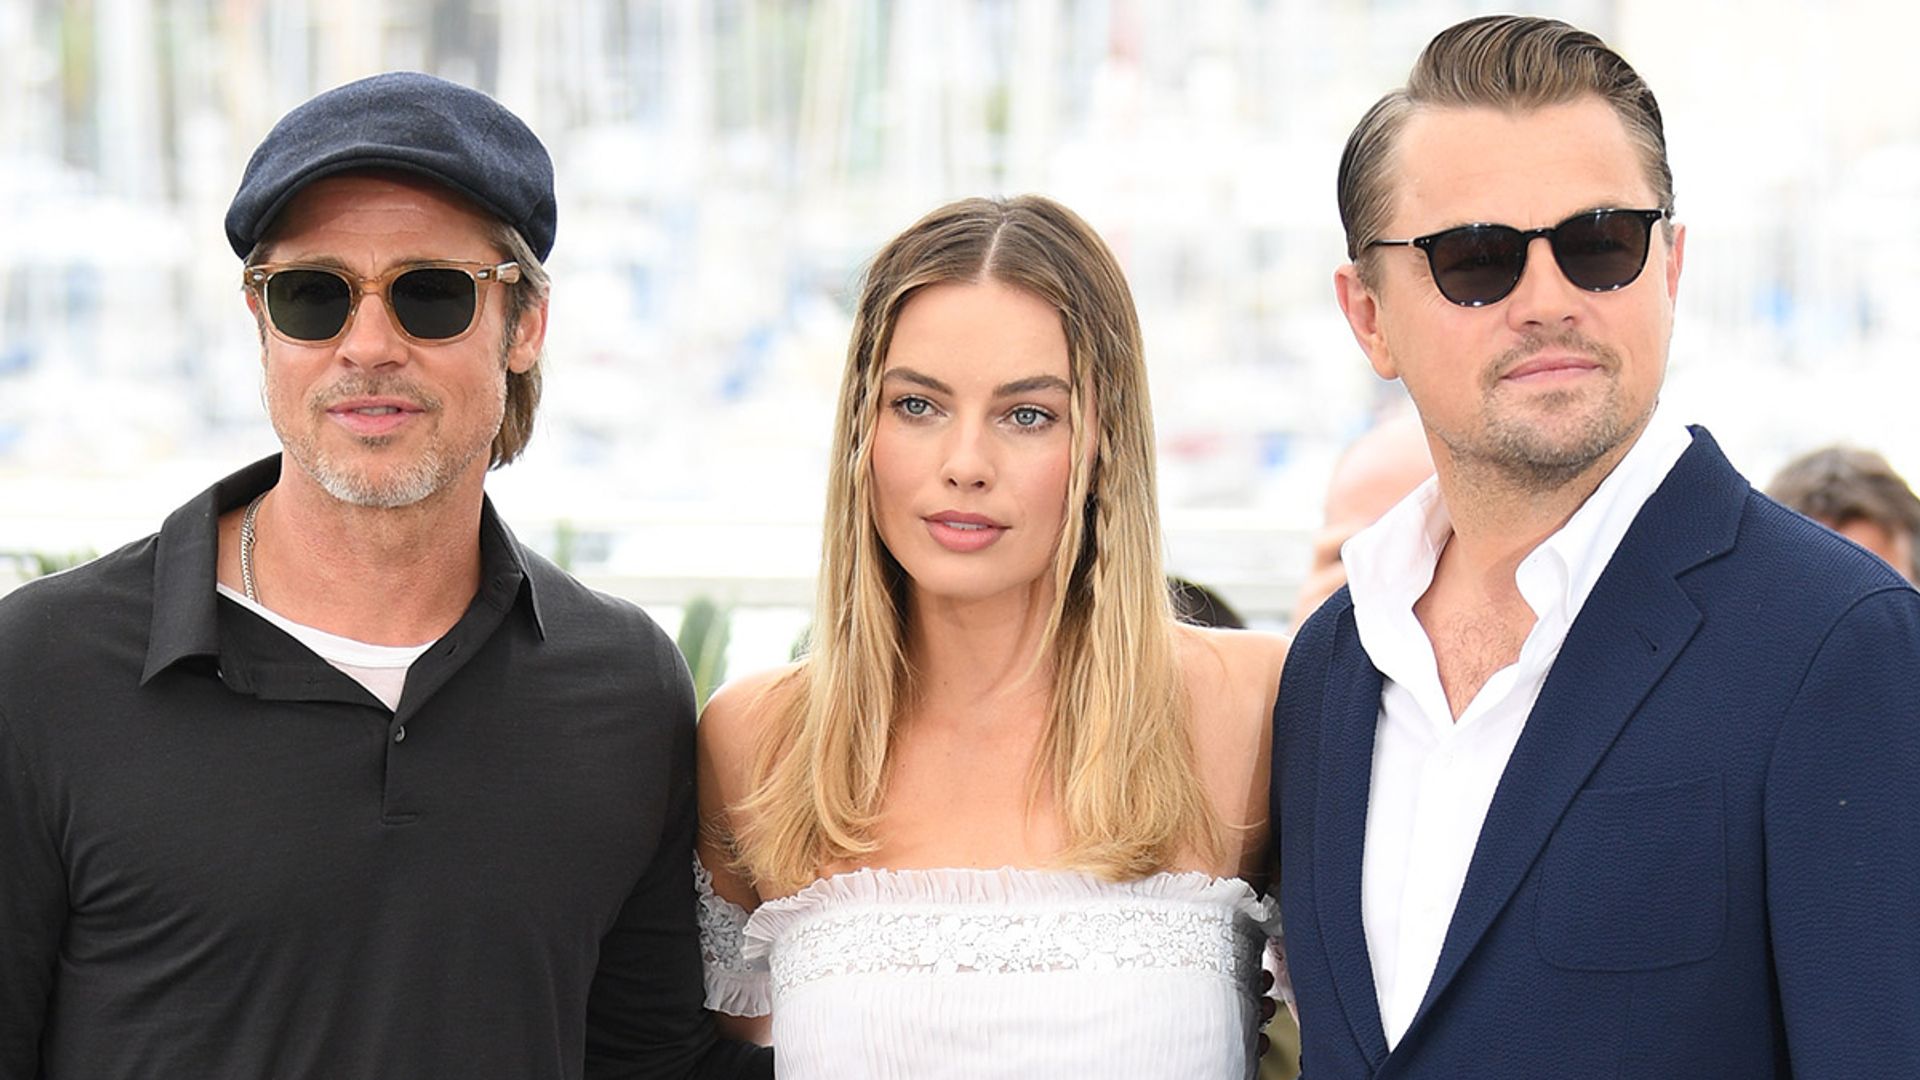 Margot Robbie stuns in TWO gorgeous summer looks at the Cannes Film Festival